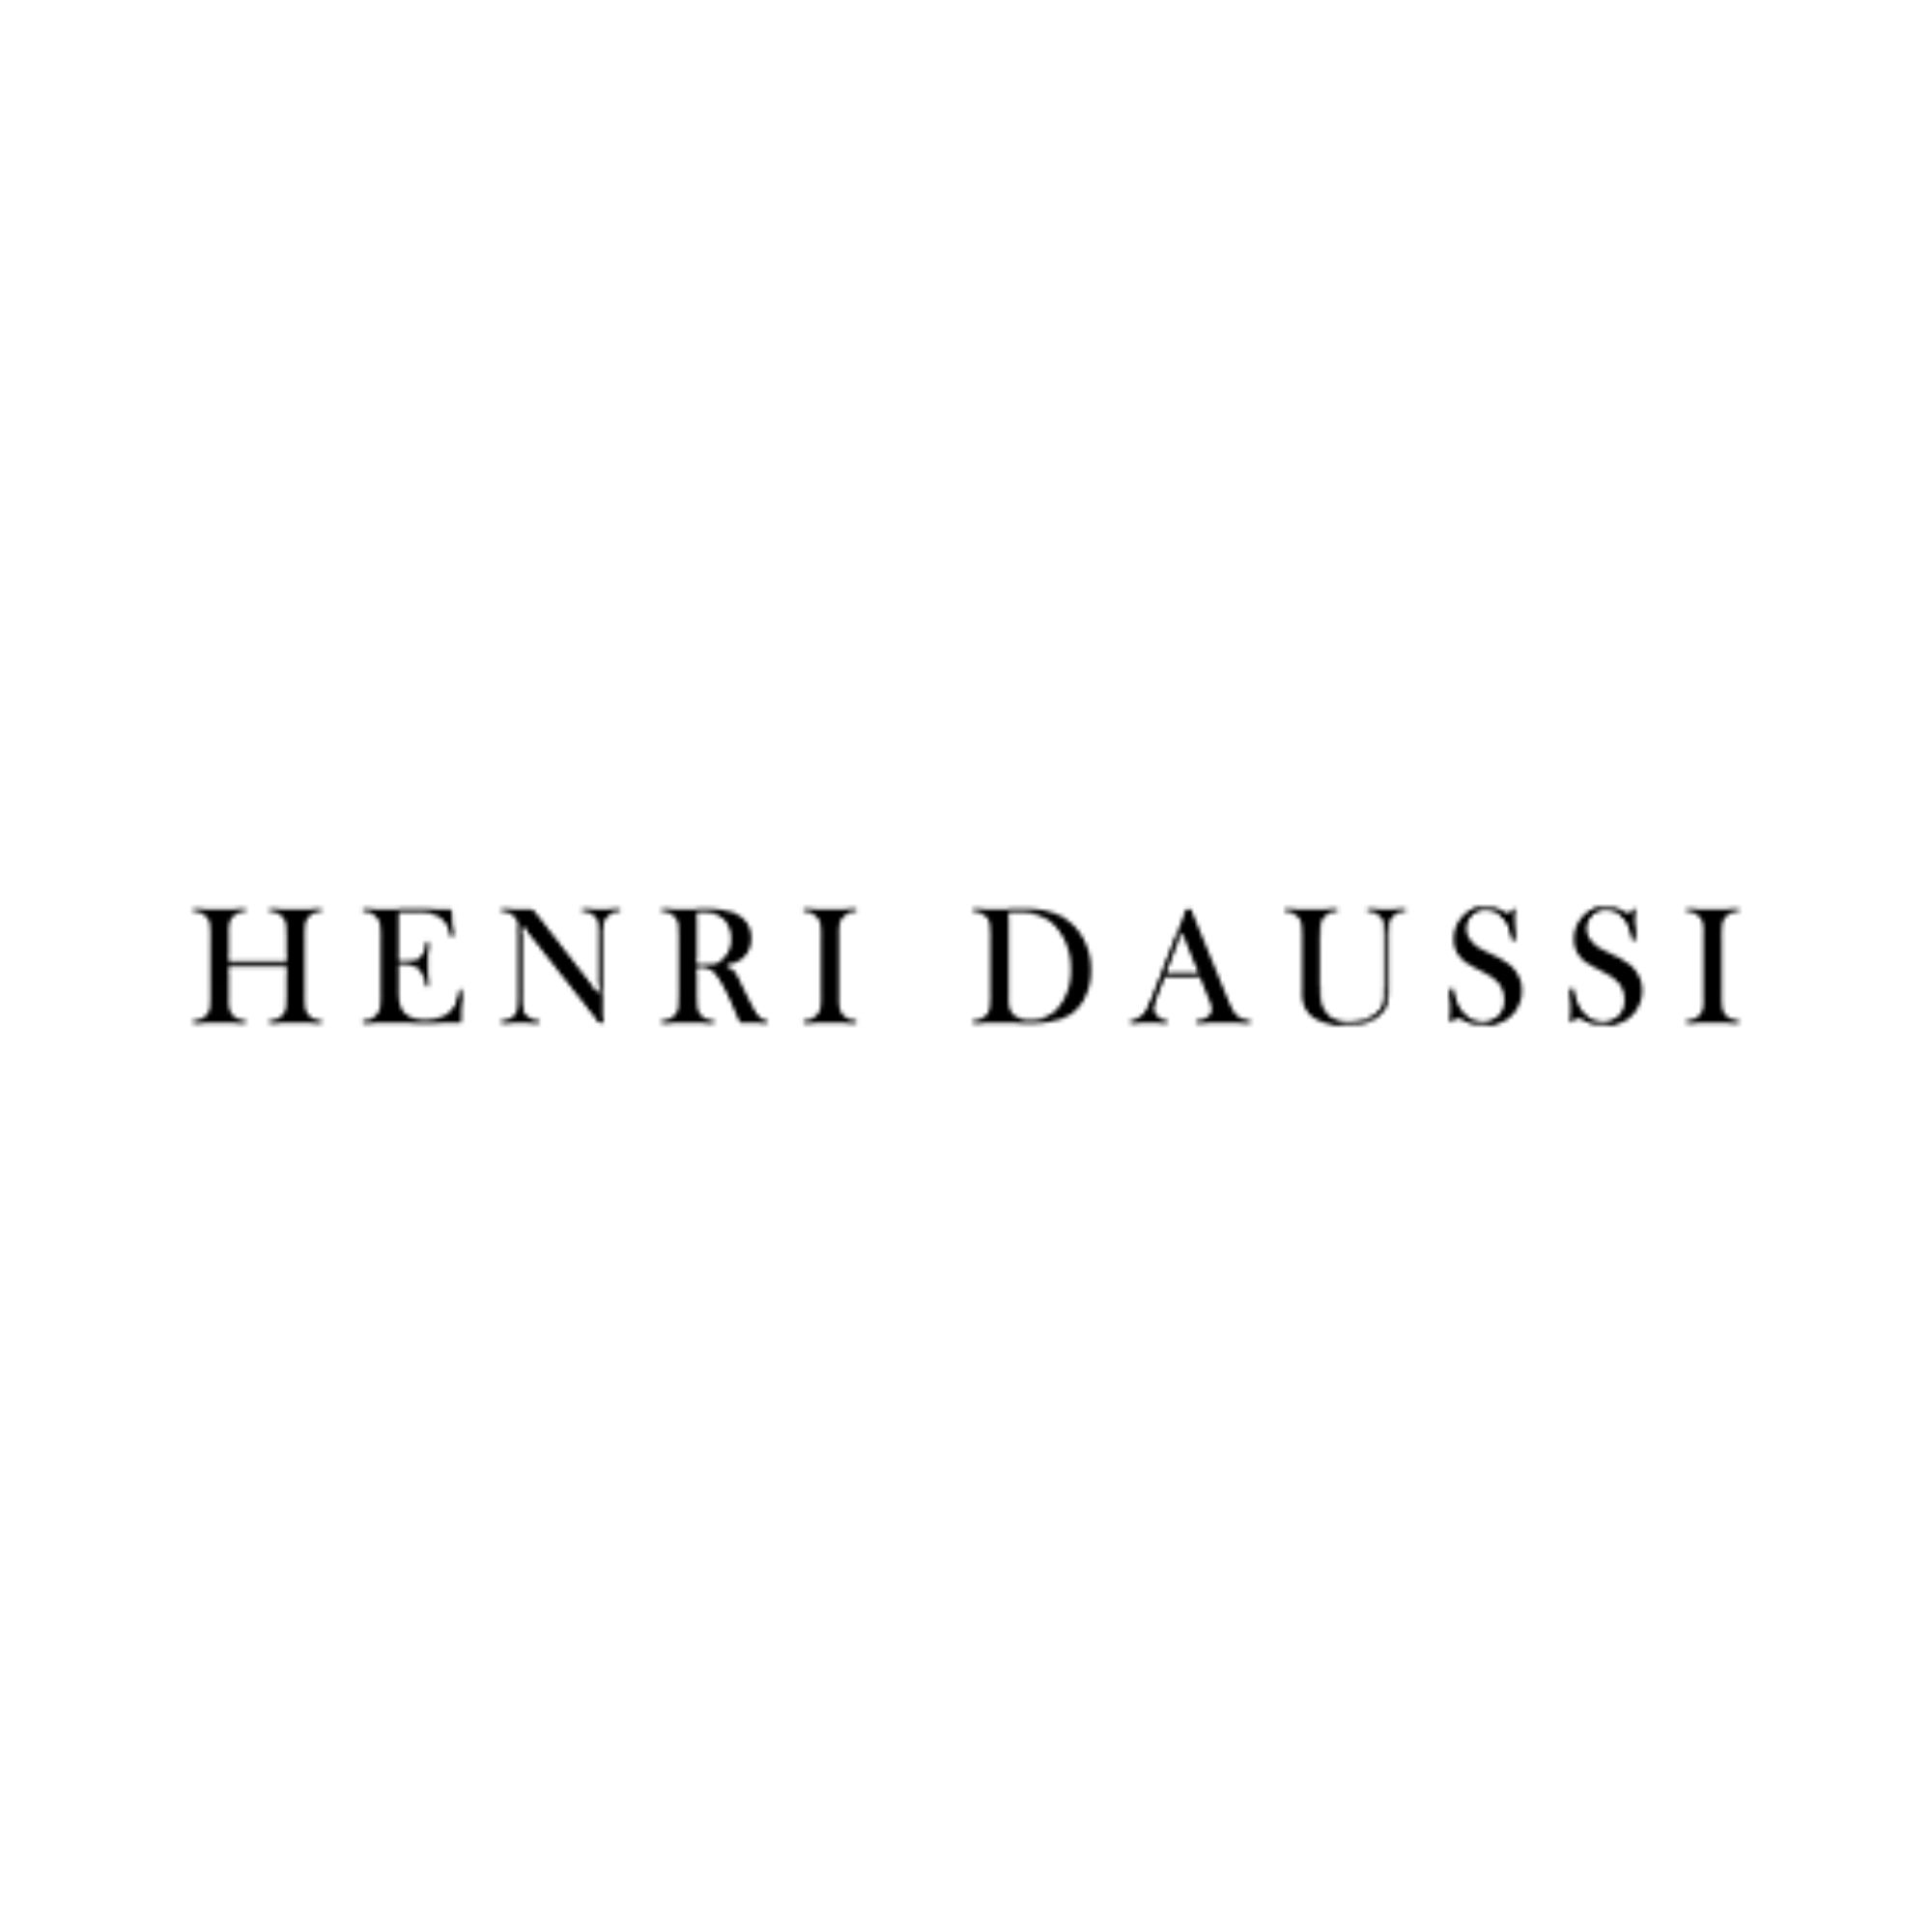 Henri Daussi collection at Henne Jewelers